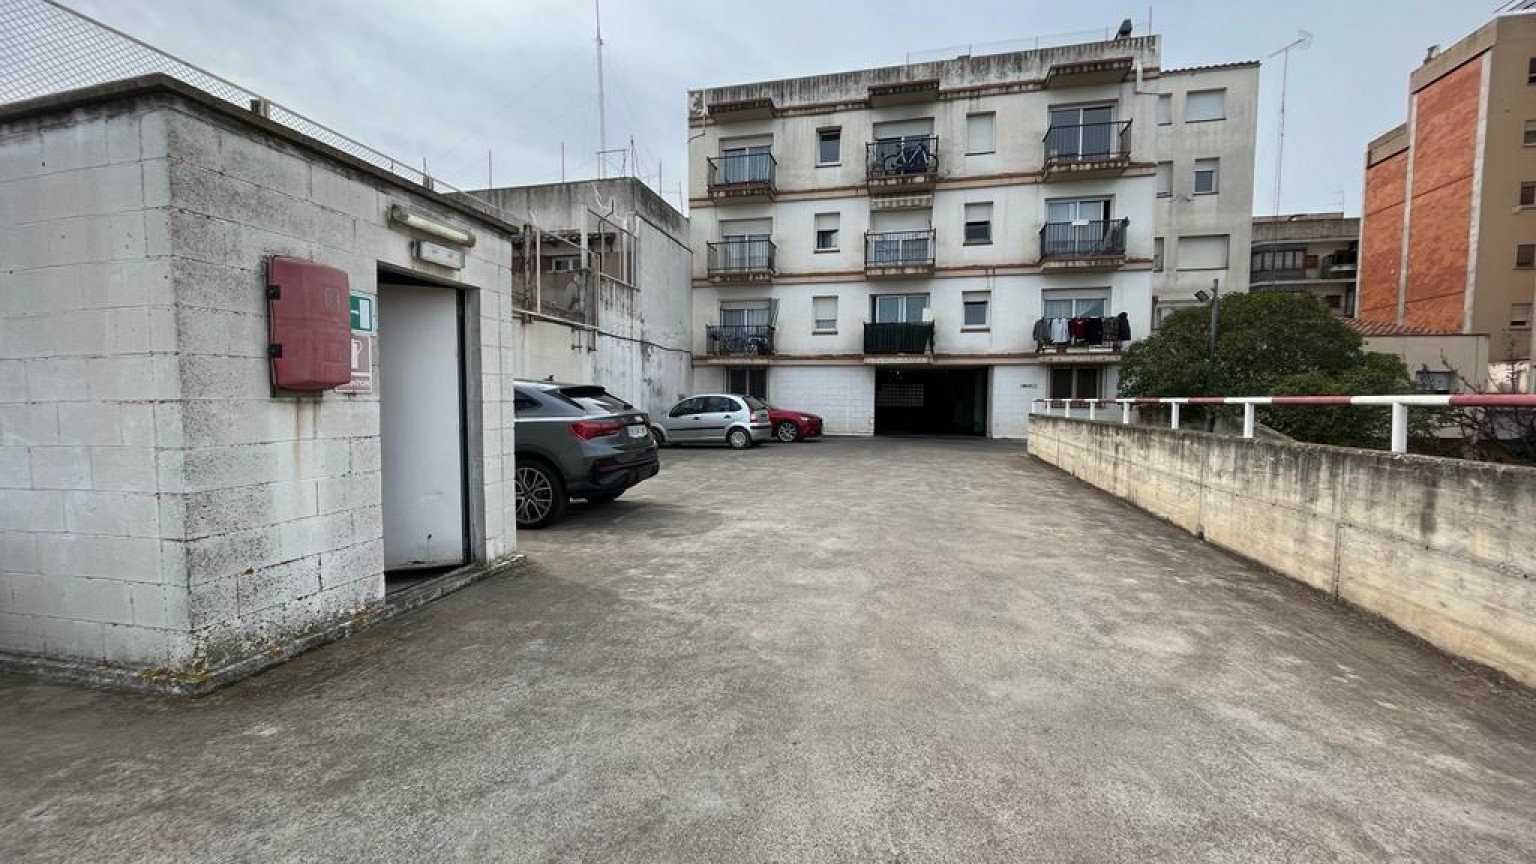 4-storey building for sale, for car parking, in the centre.